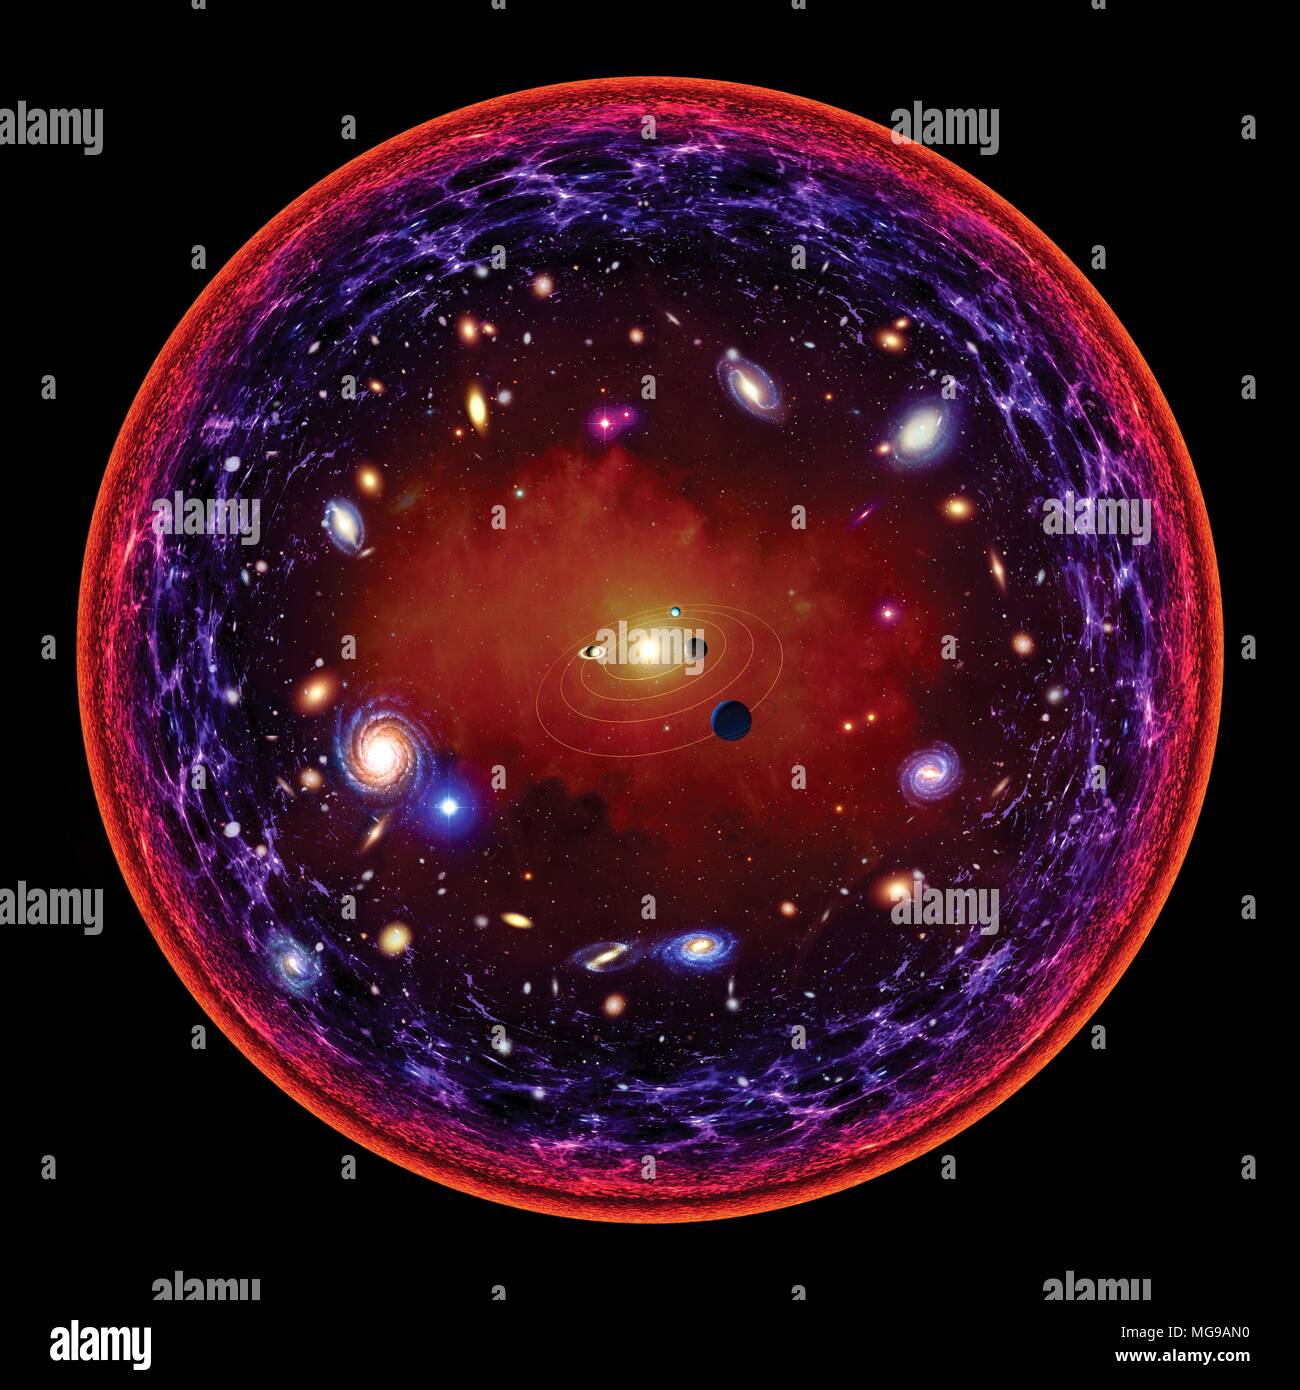 A conceptual illustration of the visible Universe. At the centre is the Solar System. As we move farther away, we encounter first stars, then galaxies. The farther into space we look, the deeper back in time we see, because of the finite speed of light. The furthest we can see is the point at which the universe became transparent - when the density of matter permitted photons to travel through the universe without absorption. This is depicted at the edge of the circle. Stock Photo